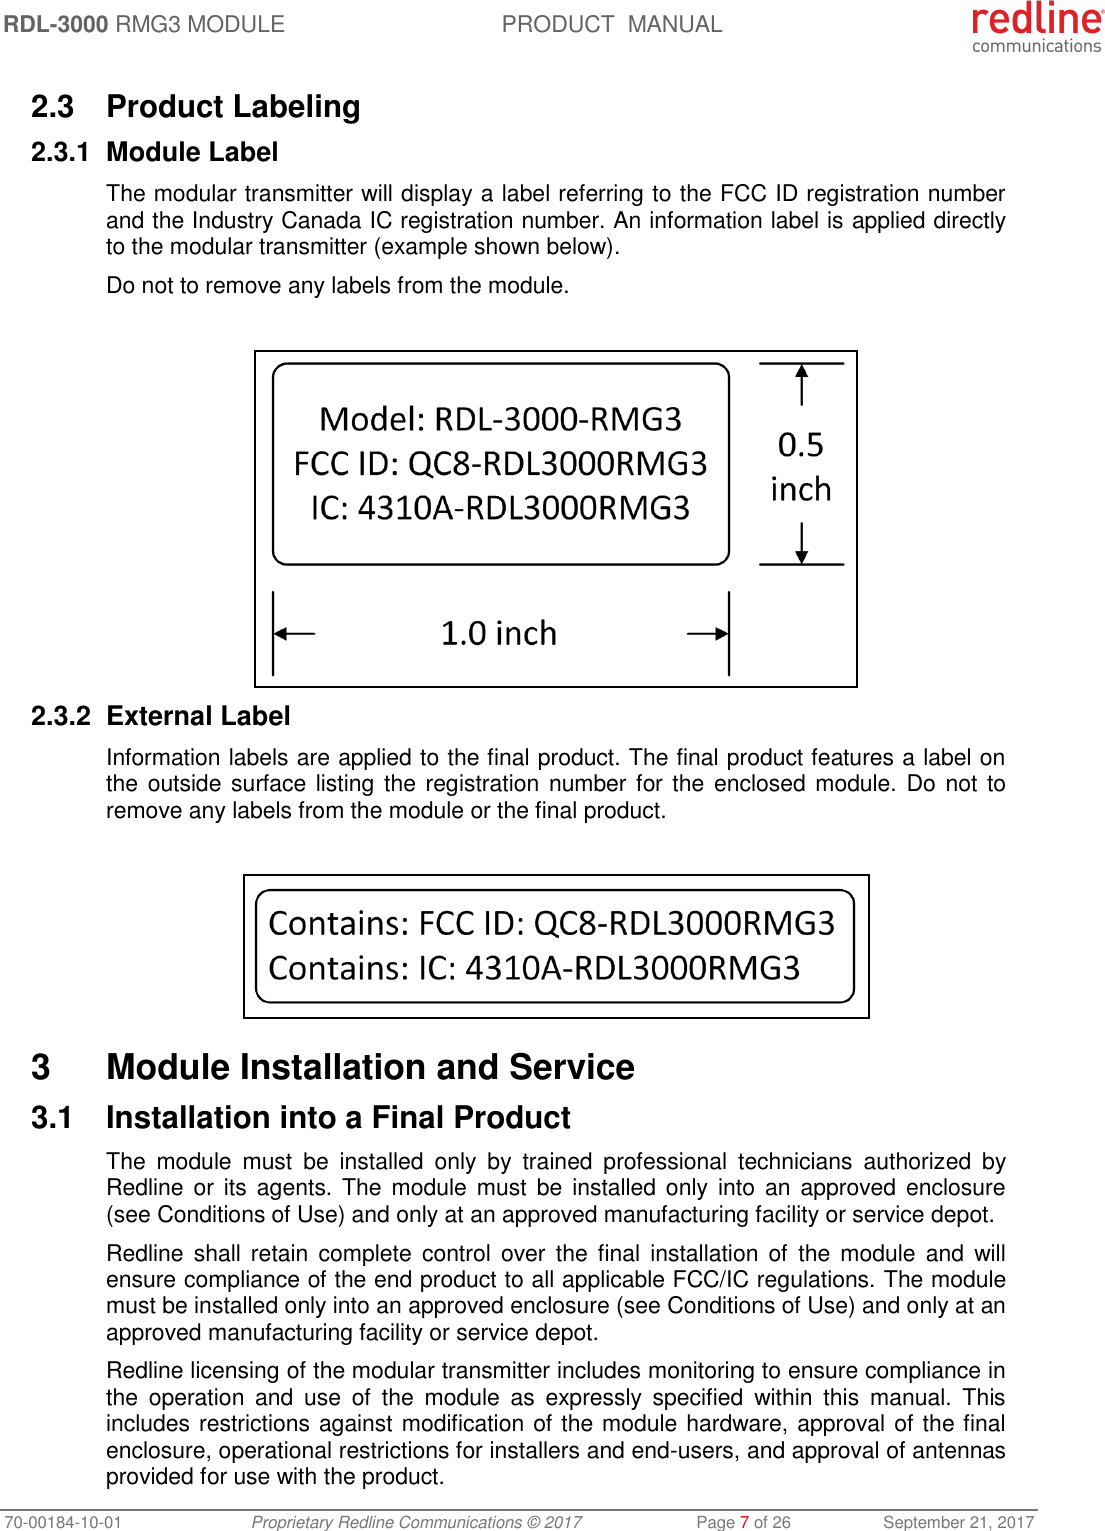 RDL-3000 RMG3 MODULE PRODUCT  MANUAL 70-00184-10-01 Proprietary Redline Communications © 2017  Page 7 of 26  September 21, 2017  2.3  Product Labeling 2.3.1  Module Label The modular transmitter will display a label referring to the FCC ID registration number and the Industry Canada IC registration number. An information label is applied directly to the modular transmitter (example shown below). Do not to remove any labels from the module.   2.3.2  External Label Information labels are applied to the final product. The final product features a label on the outside surface listing the registration number for the enclosed module. Do not to remove any labels from the module or the final product.    3  Module Installation and Service 3.1  Installation into a Final Product The  module  must  be  installed  only  by  trained  professional  technicians  authorized  by Redline or  its agents. The module must  be  installed  only  into  an  approved  enclosure (see Conditions of Use) and only at an approved manufacturing facility or service depot. Redline shall retain  complete  control  over  the final  installation  of  the  module  and  will ensure compliance of the end product to all applicable FCC/IC regulations. The module must be installed only into an approved enclosure (see Conditions of Use) and only at an approved manufacturing facility or service depot. Redline licensing of the modular transmitter includes monitoring to ensure compliance in the  operation  and  use  of  the  module  as  expressly  specified  within  this  manual.  This includes restrictions against modification of the module hardware, approval of the final enclosure, operational restrictions for installers and end-users, and approval of antennas provided for use with the product. 